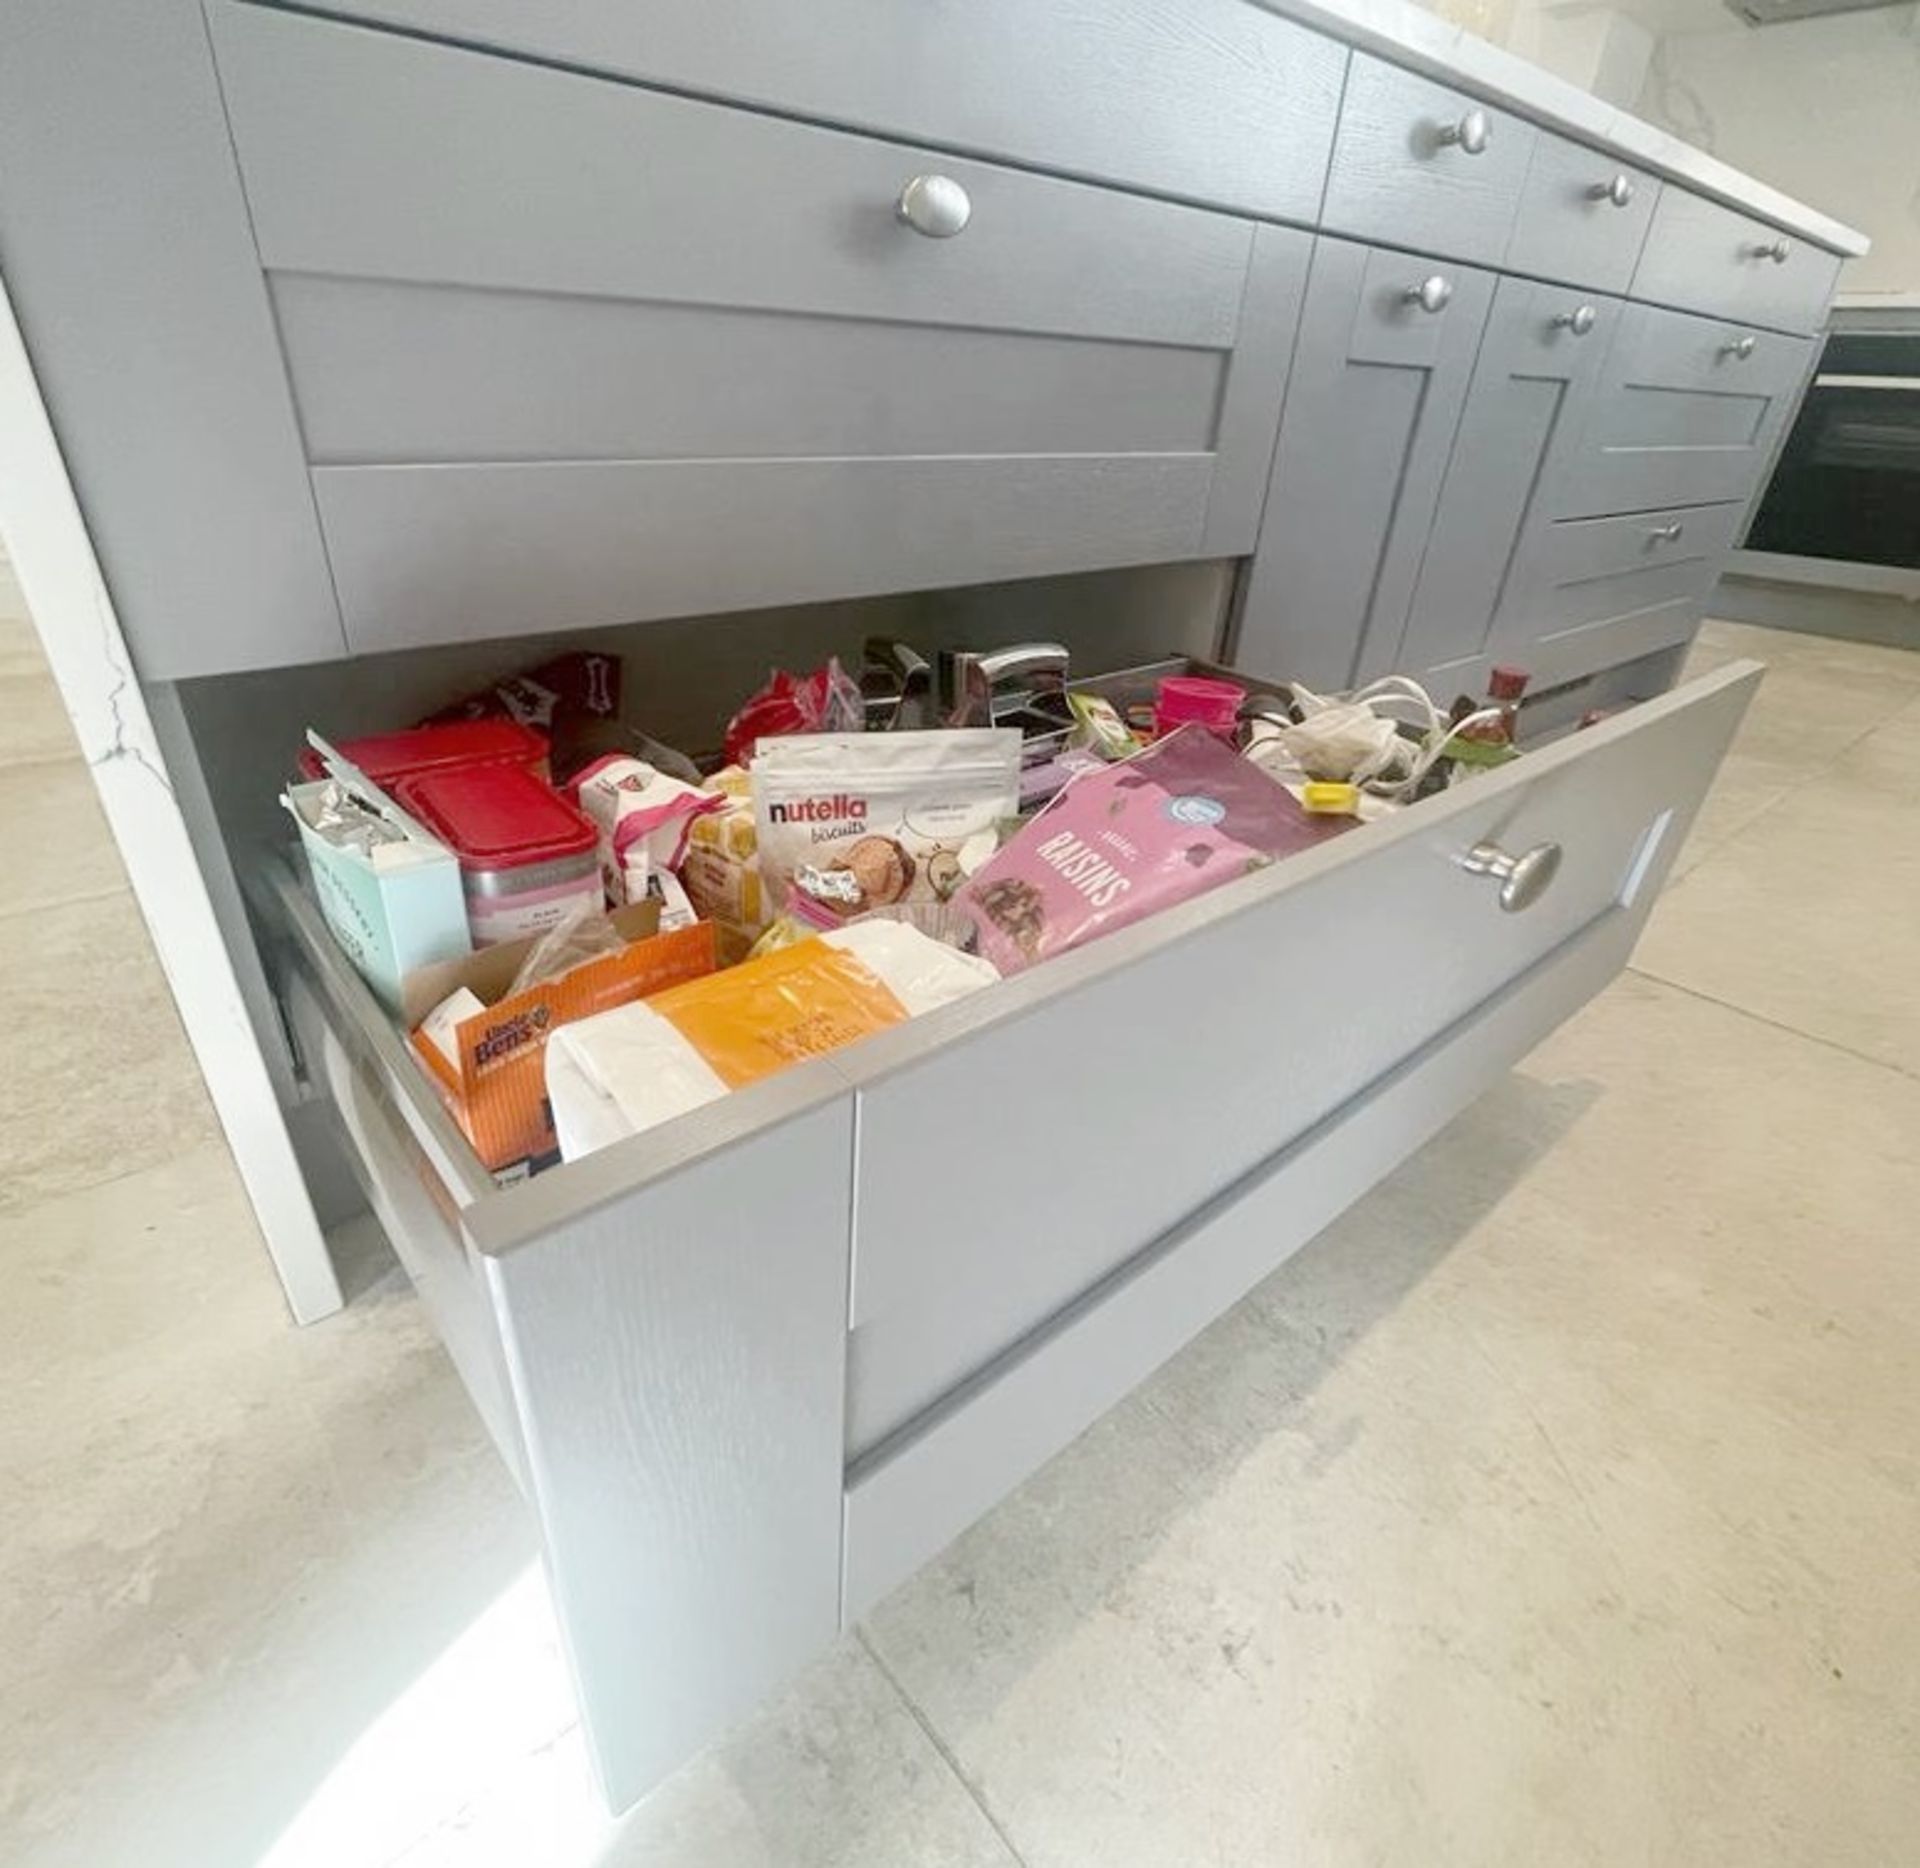 1 x SIEMATIC Bespoke Shaker-style Fitted Kitchen, Utility Room, Appliances & Modern Quartz Surfaces - Image 30 of 99